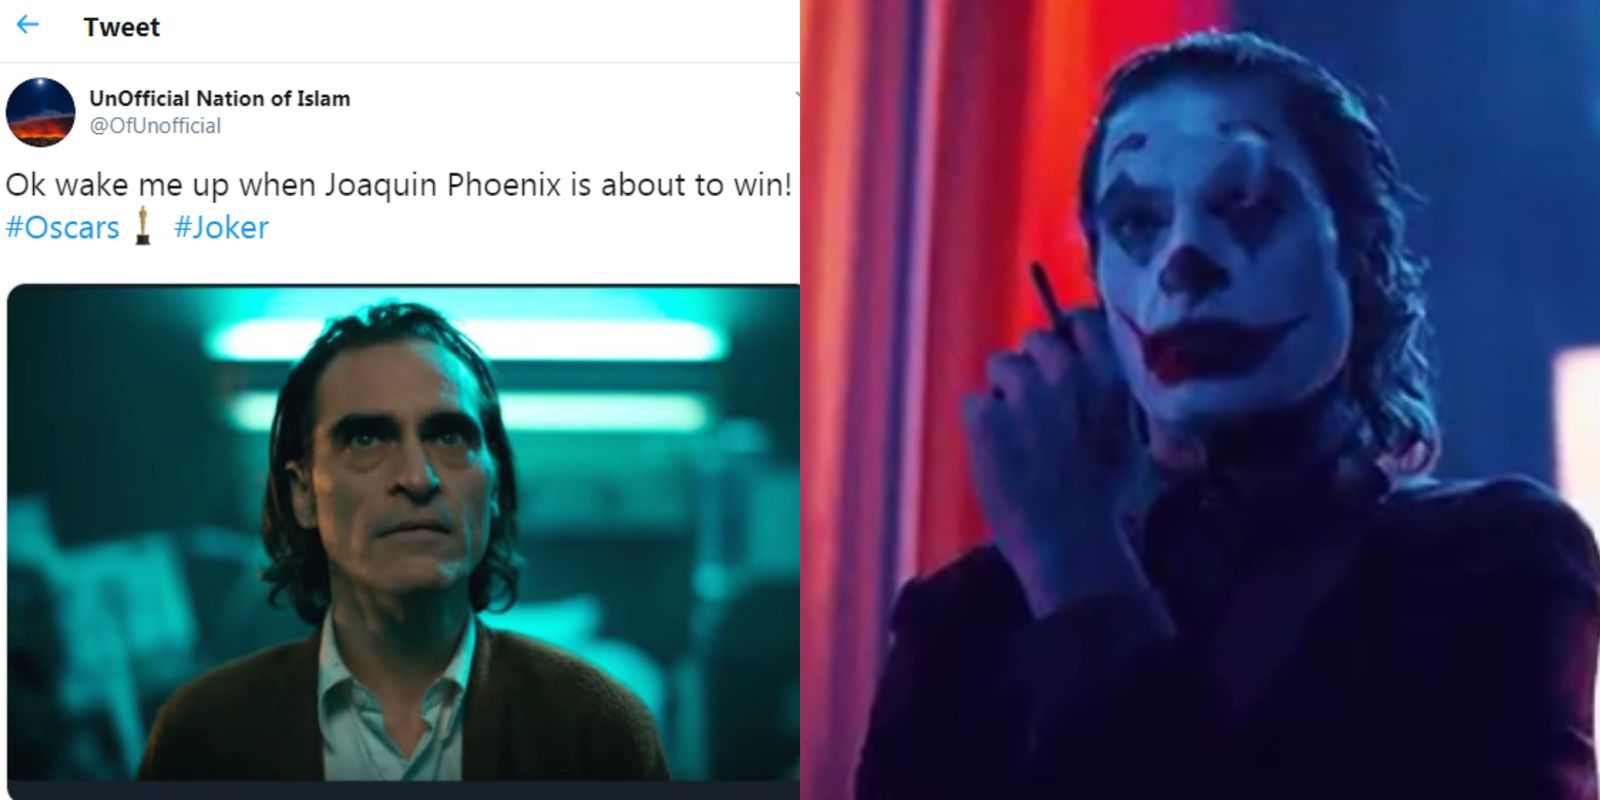 Oscars 2020: Fans Feel Joaquin Phoenix’s Joker Was Snubbed At The Academy Awards; Express Their Disappointment With Memes